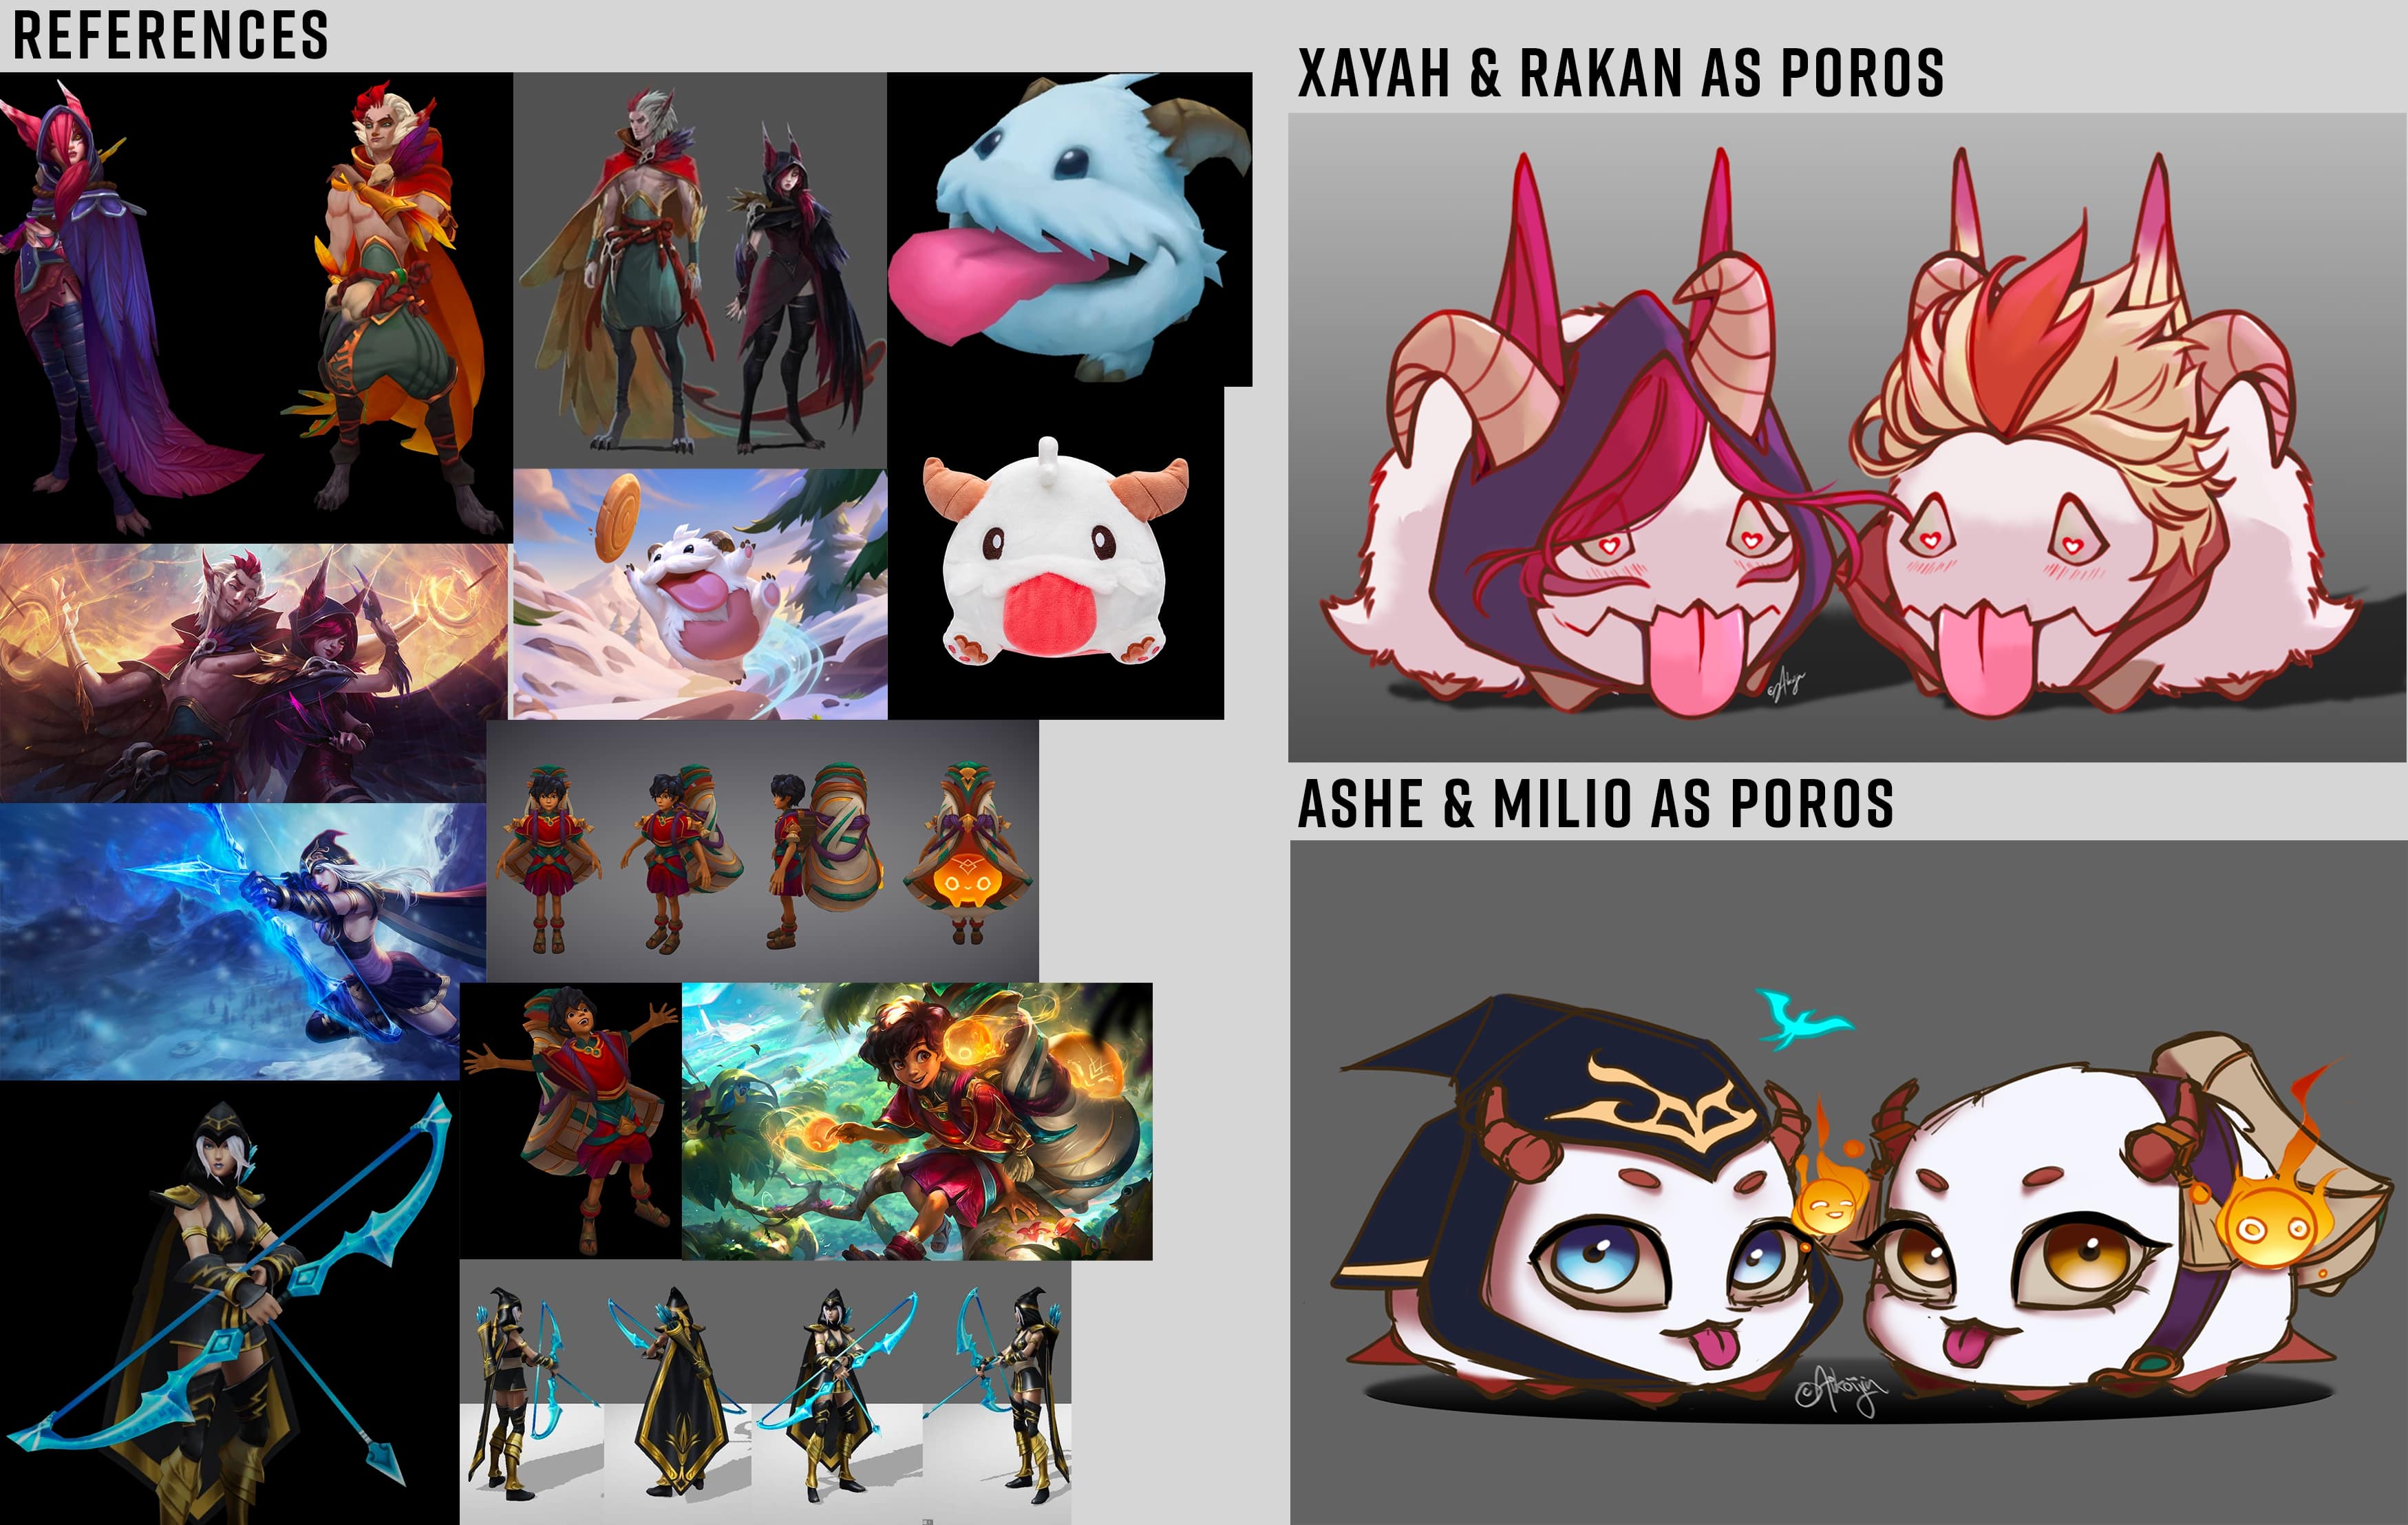 I wanted to study key features of champions and what made them so iconic that you could recognize them even in different forms (in this case; poros). For Xayah and Rakan, I found that the most iconic features of the lovebirds were their hair (and ears) and hoods as well as Xayah’s face markings. Even without the rest of the cape and feathers, we can distinguish the champions due to these 3 components. || As for Ashe and Milio, the key features were Ashe’s hood and hawkshot and Milio’s backpack and fire friends(or as he calls it, Fuemigos). In addition to this, I intentionally chose bot lane duos since poros are said to be “made of love” and bot lane is notorious for being labeled as the “couple lane”.